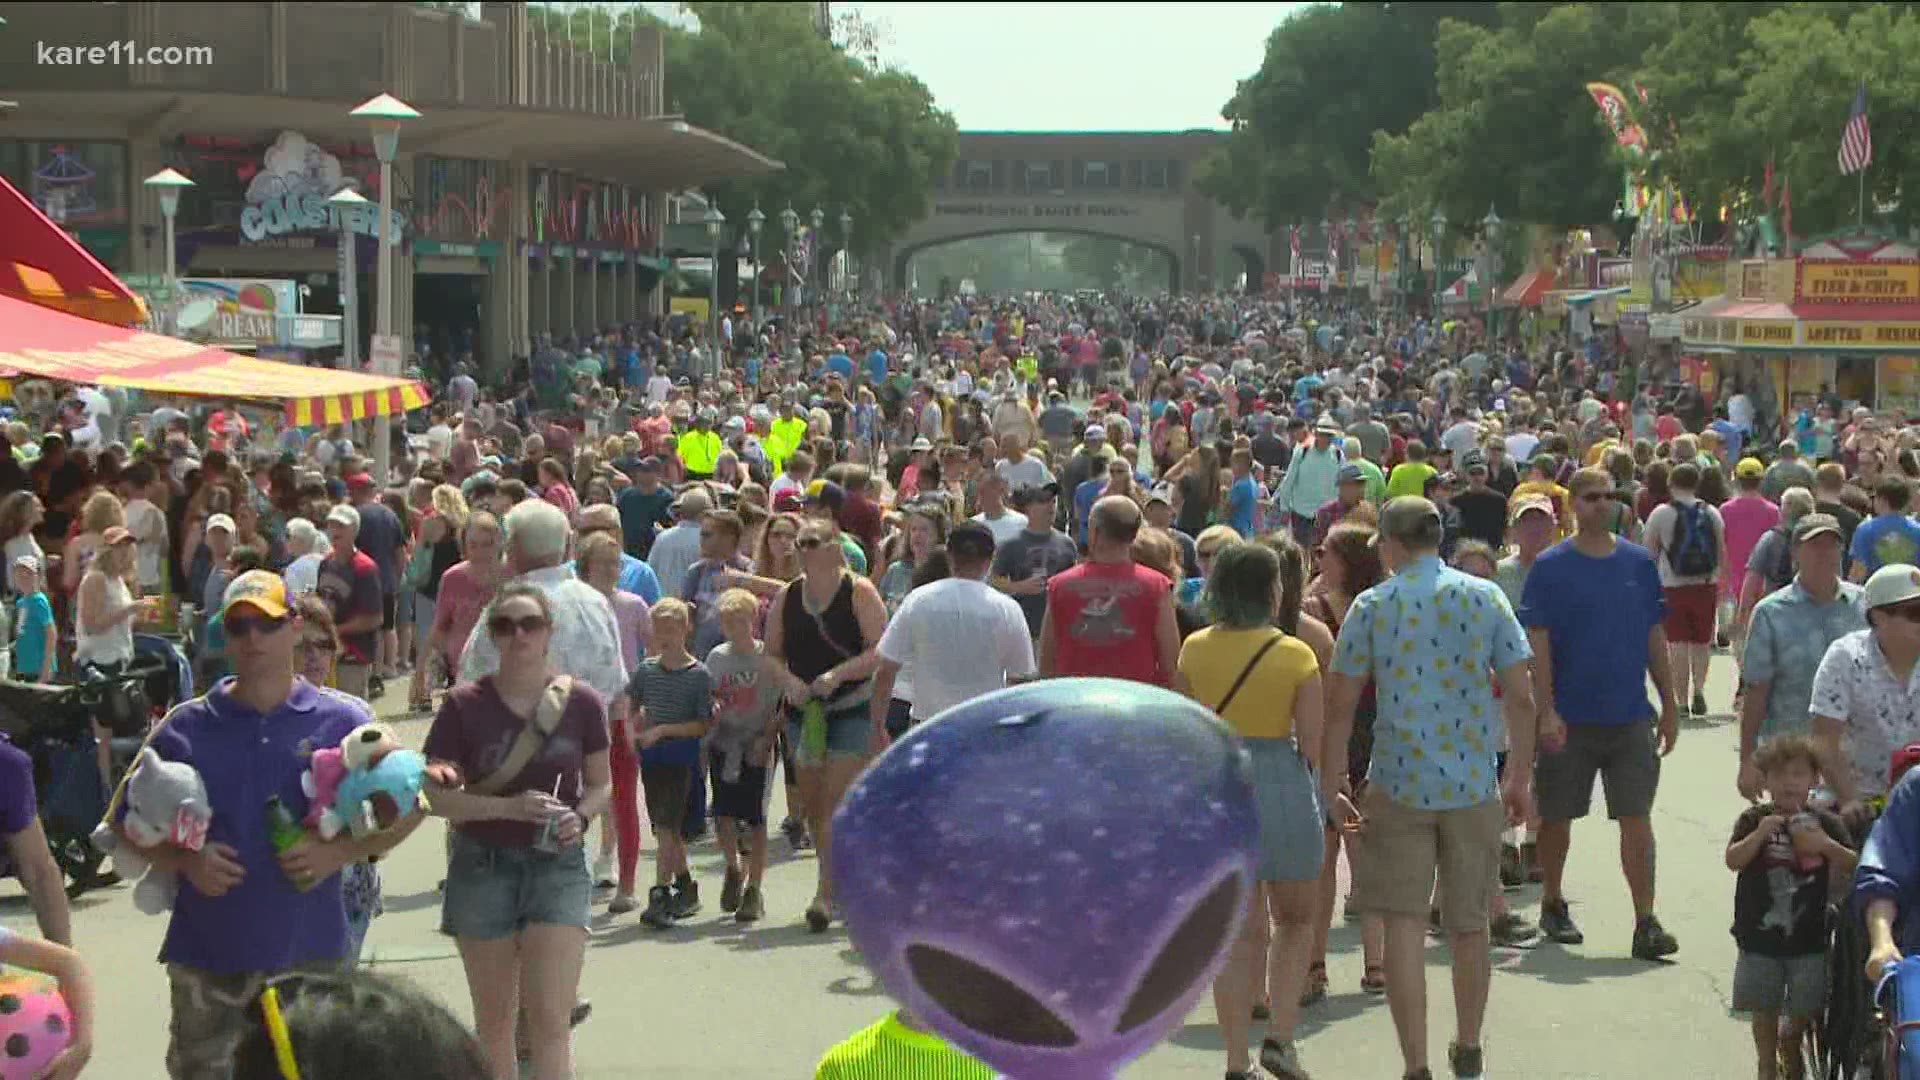 KARE 11's Jana Shortal talked with the Minnesota State Fair's general manager, Jerry Hammer.